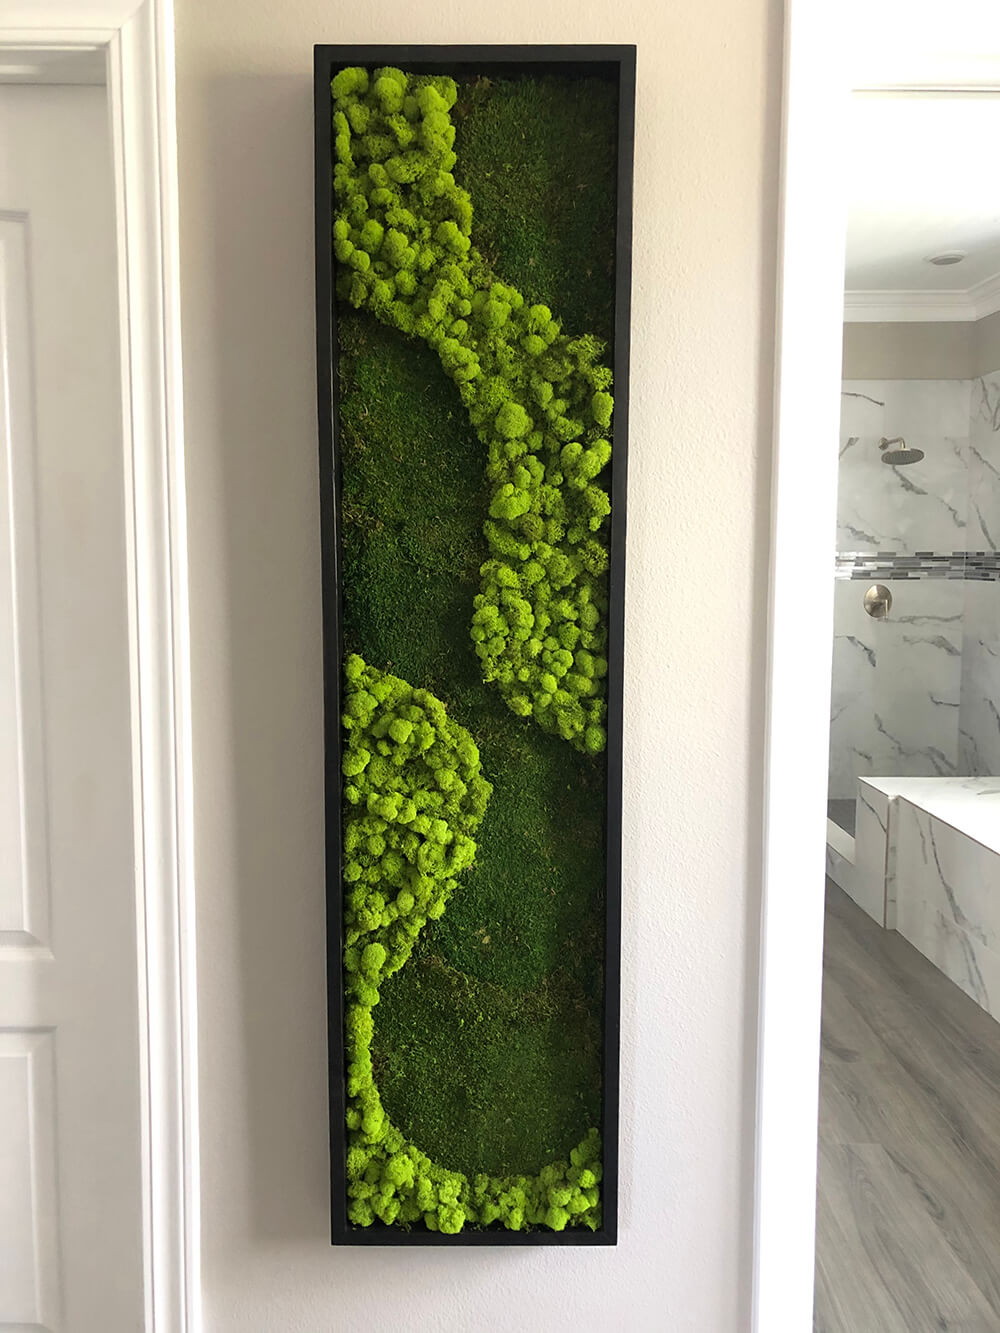 Moss wall art for residential or commercial settings, Created with preserved moss, reindeer and sheet moss